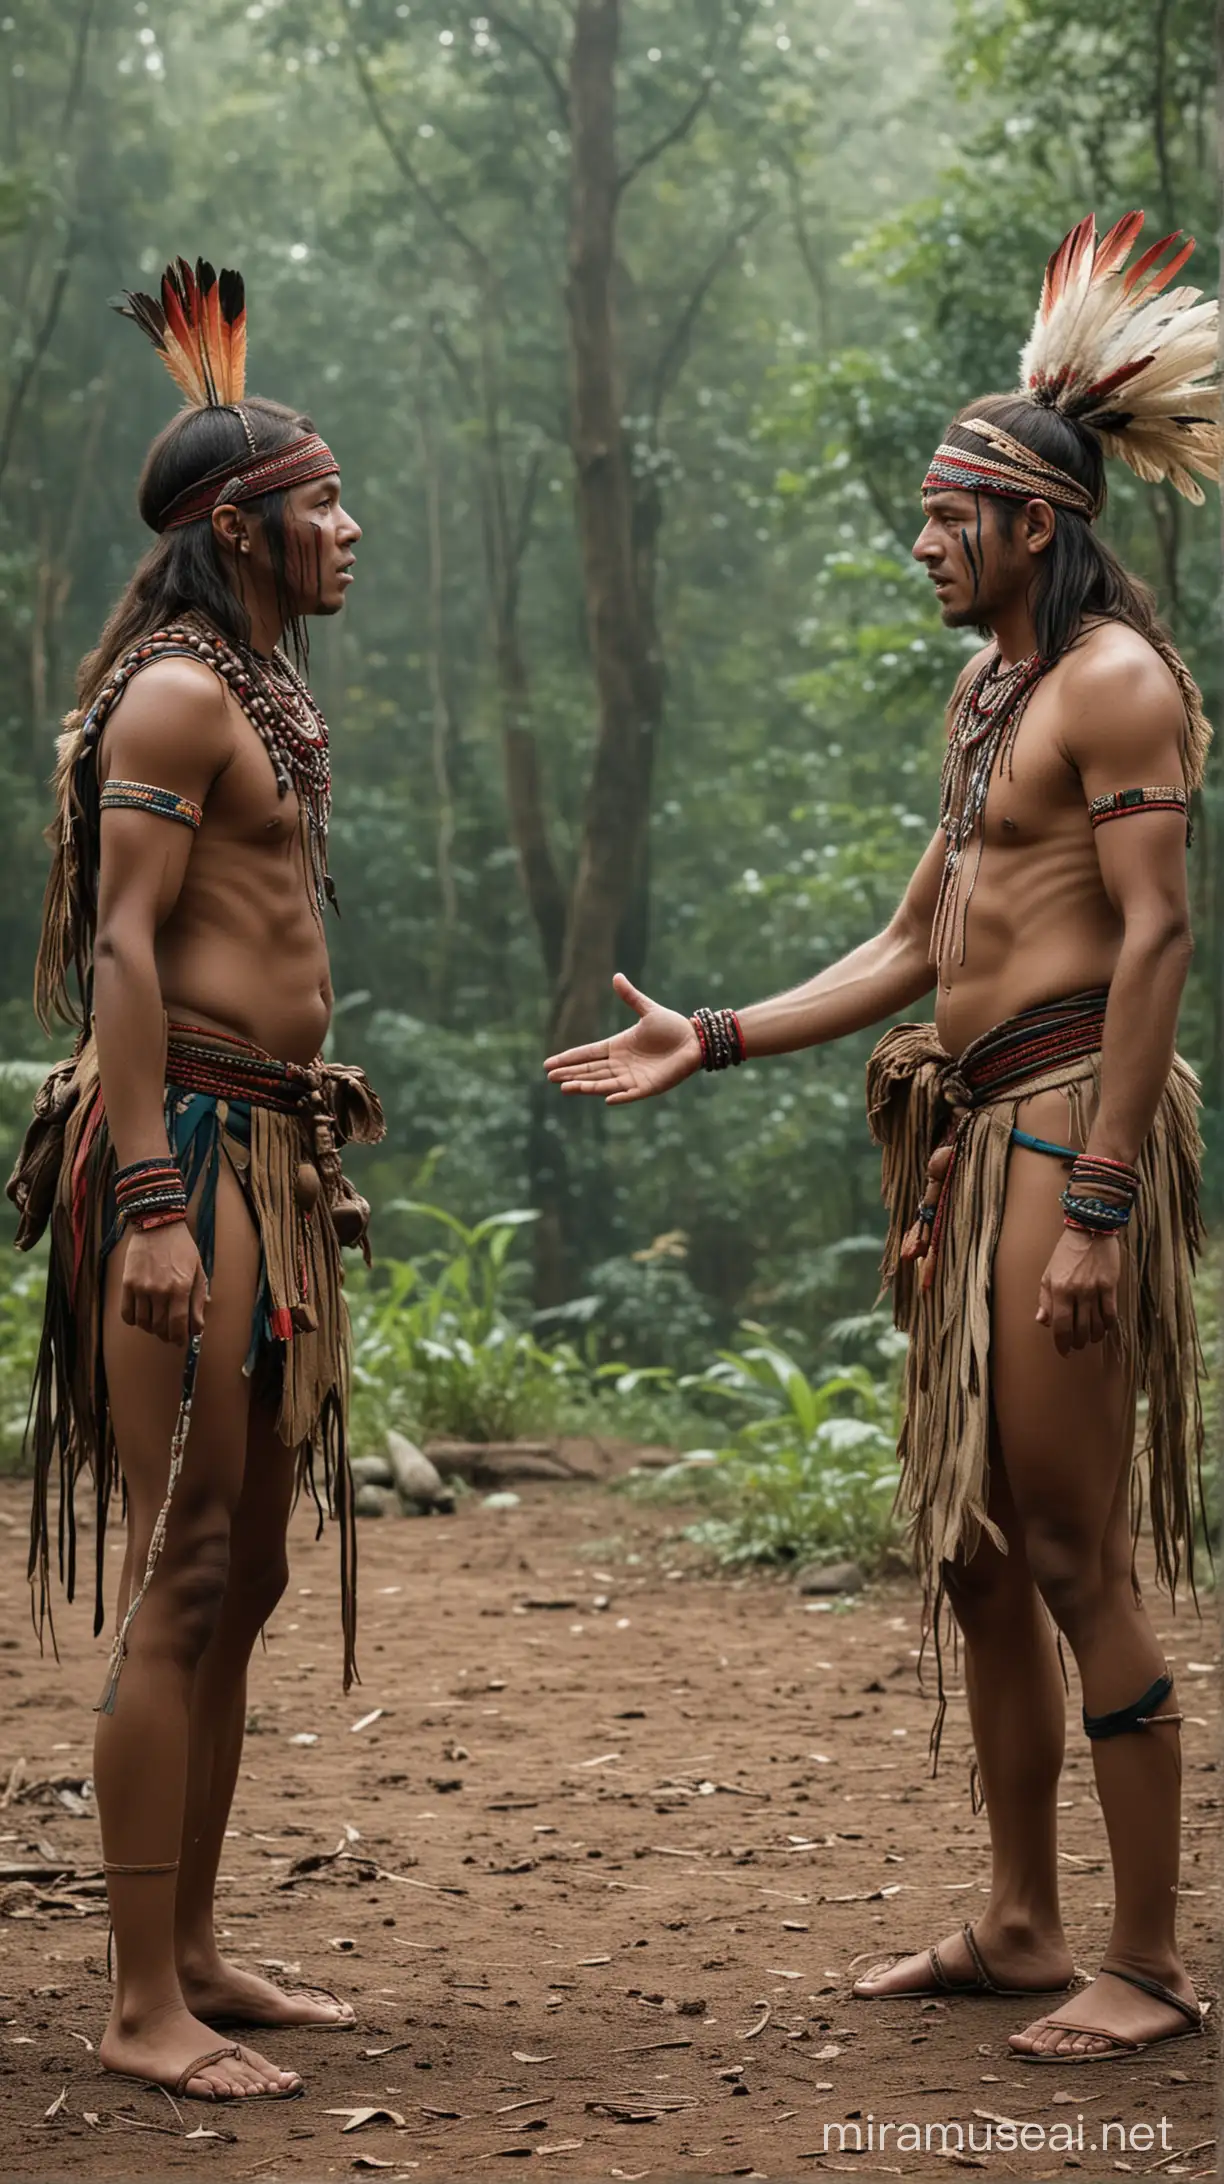 A scene where two tribe members come together and converse.
